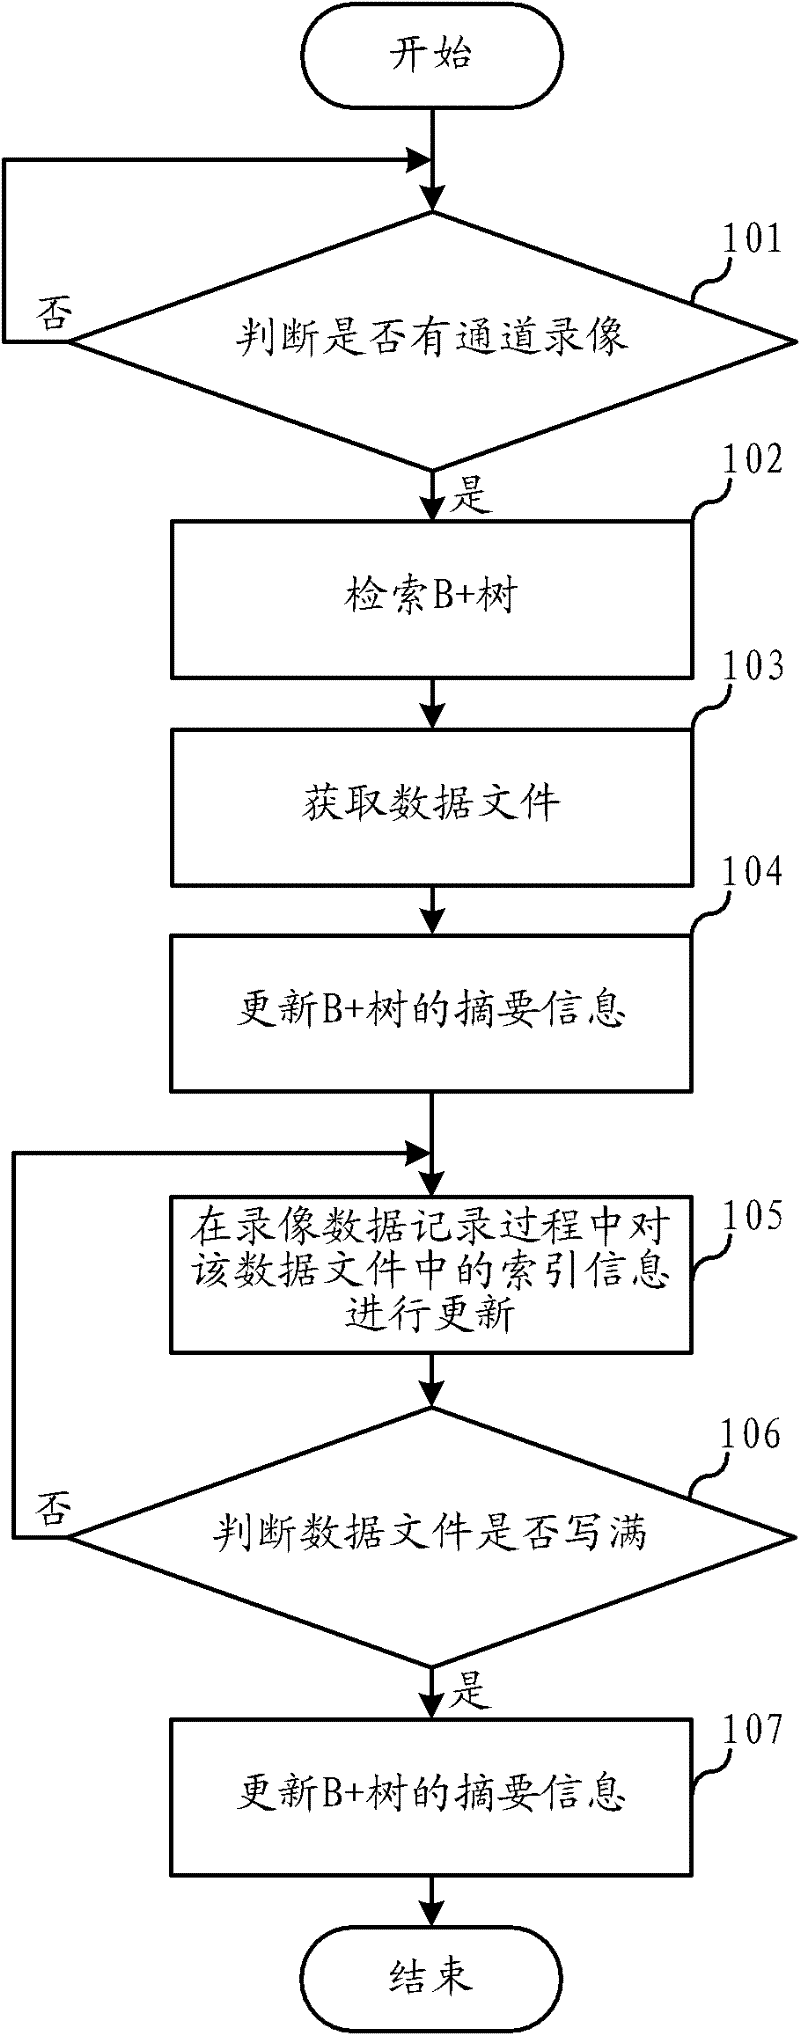 Method of video recording document storage and data recovery of digital hard-disc video recorder and system thereof